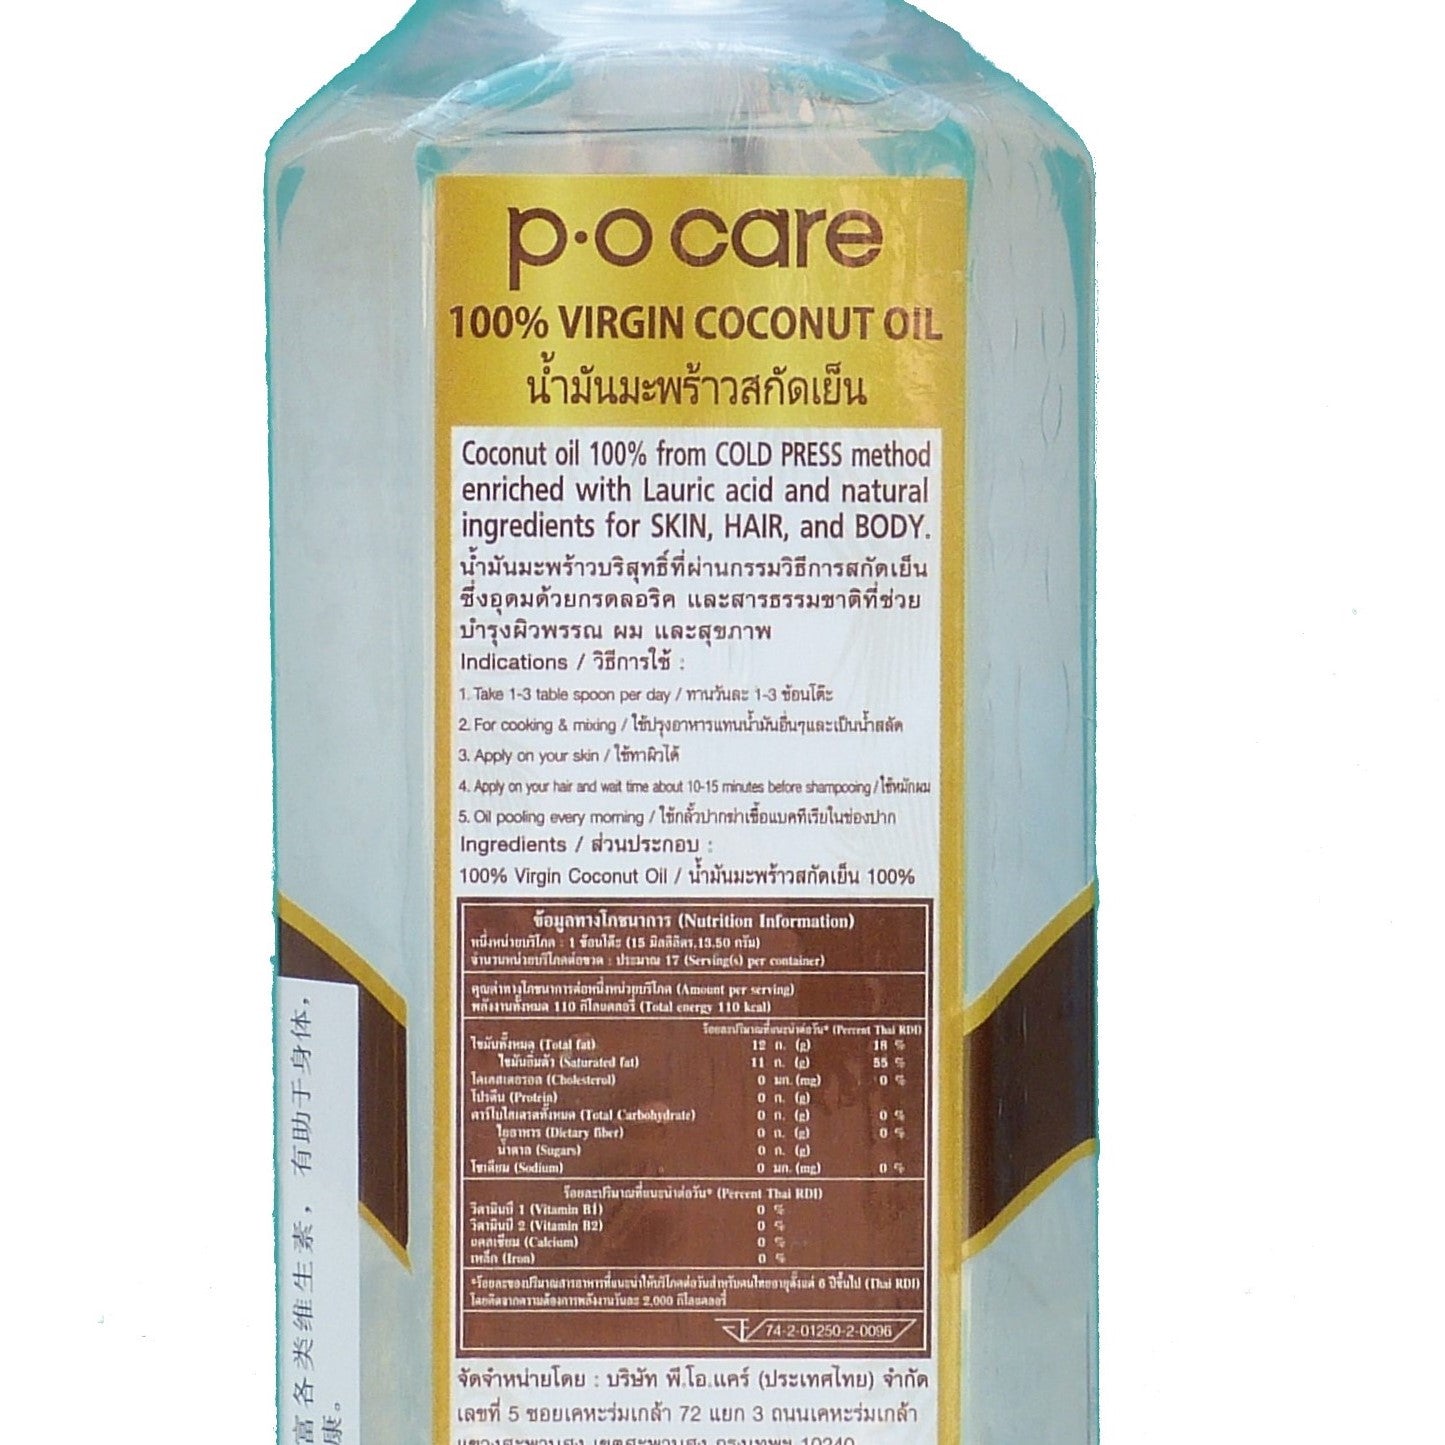 PO Care 100% Natural Coconut Oil 250ml - Asian Beauty Supply